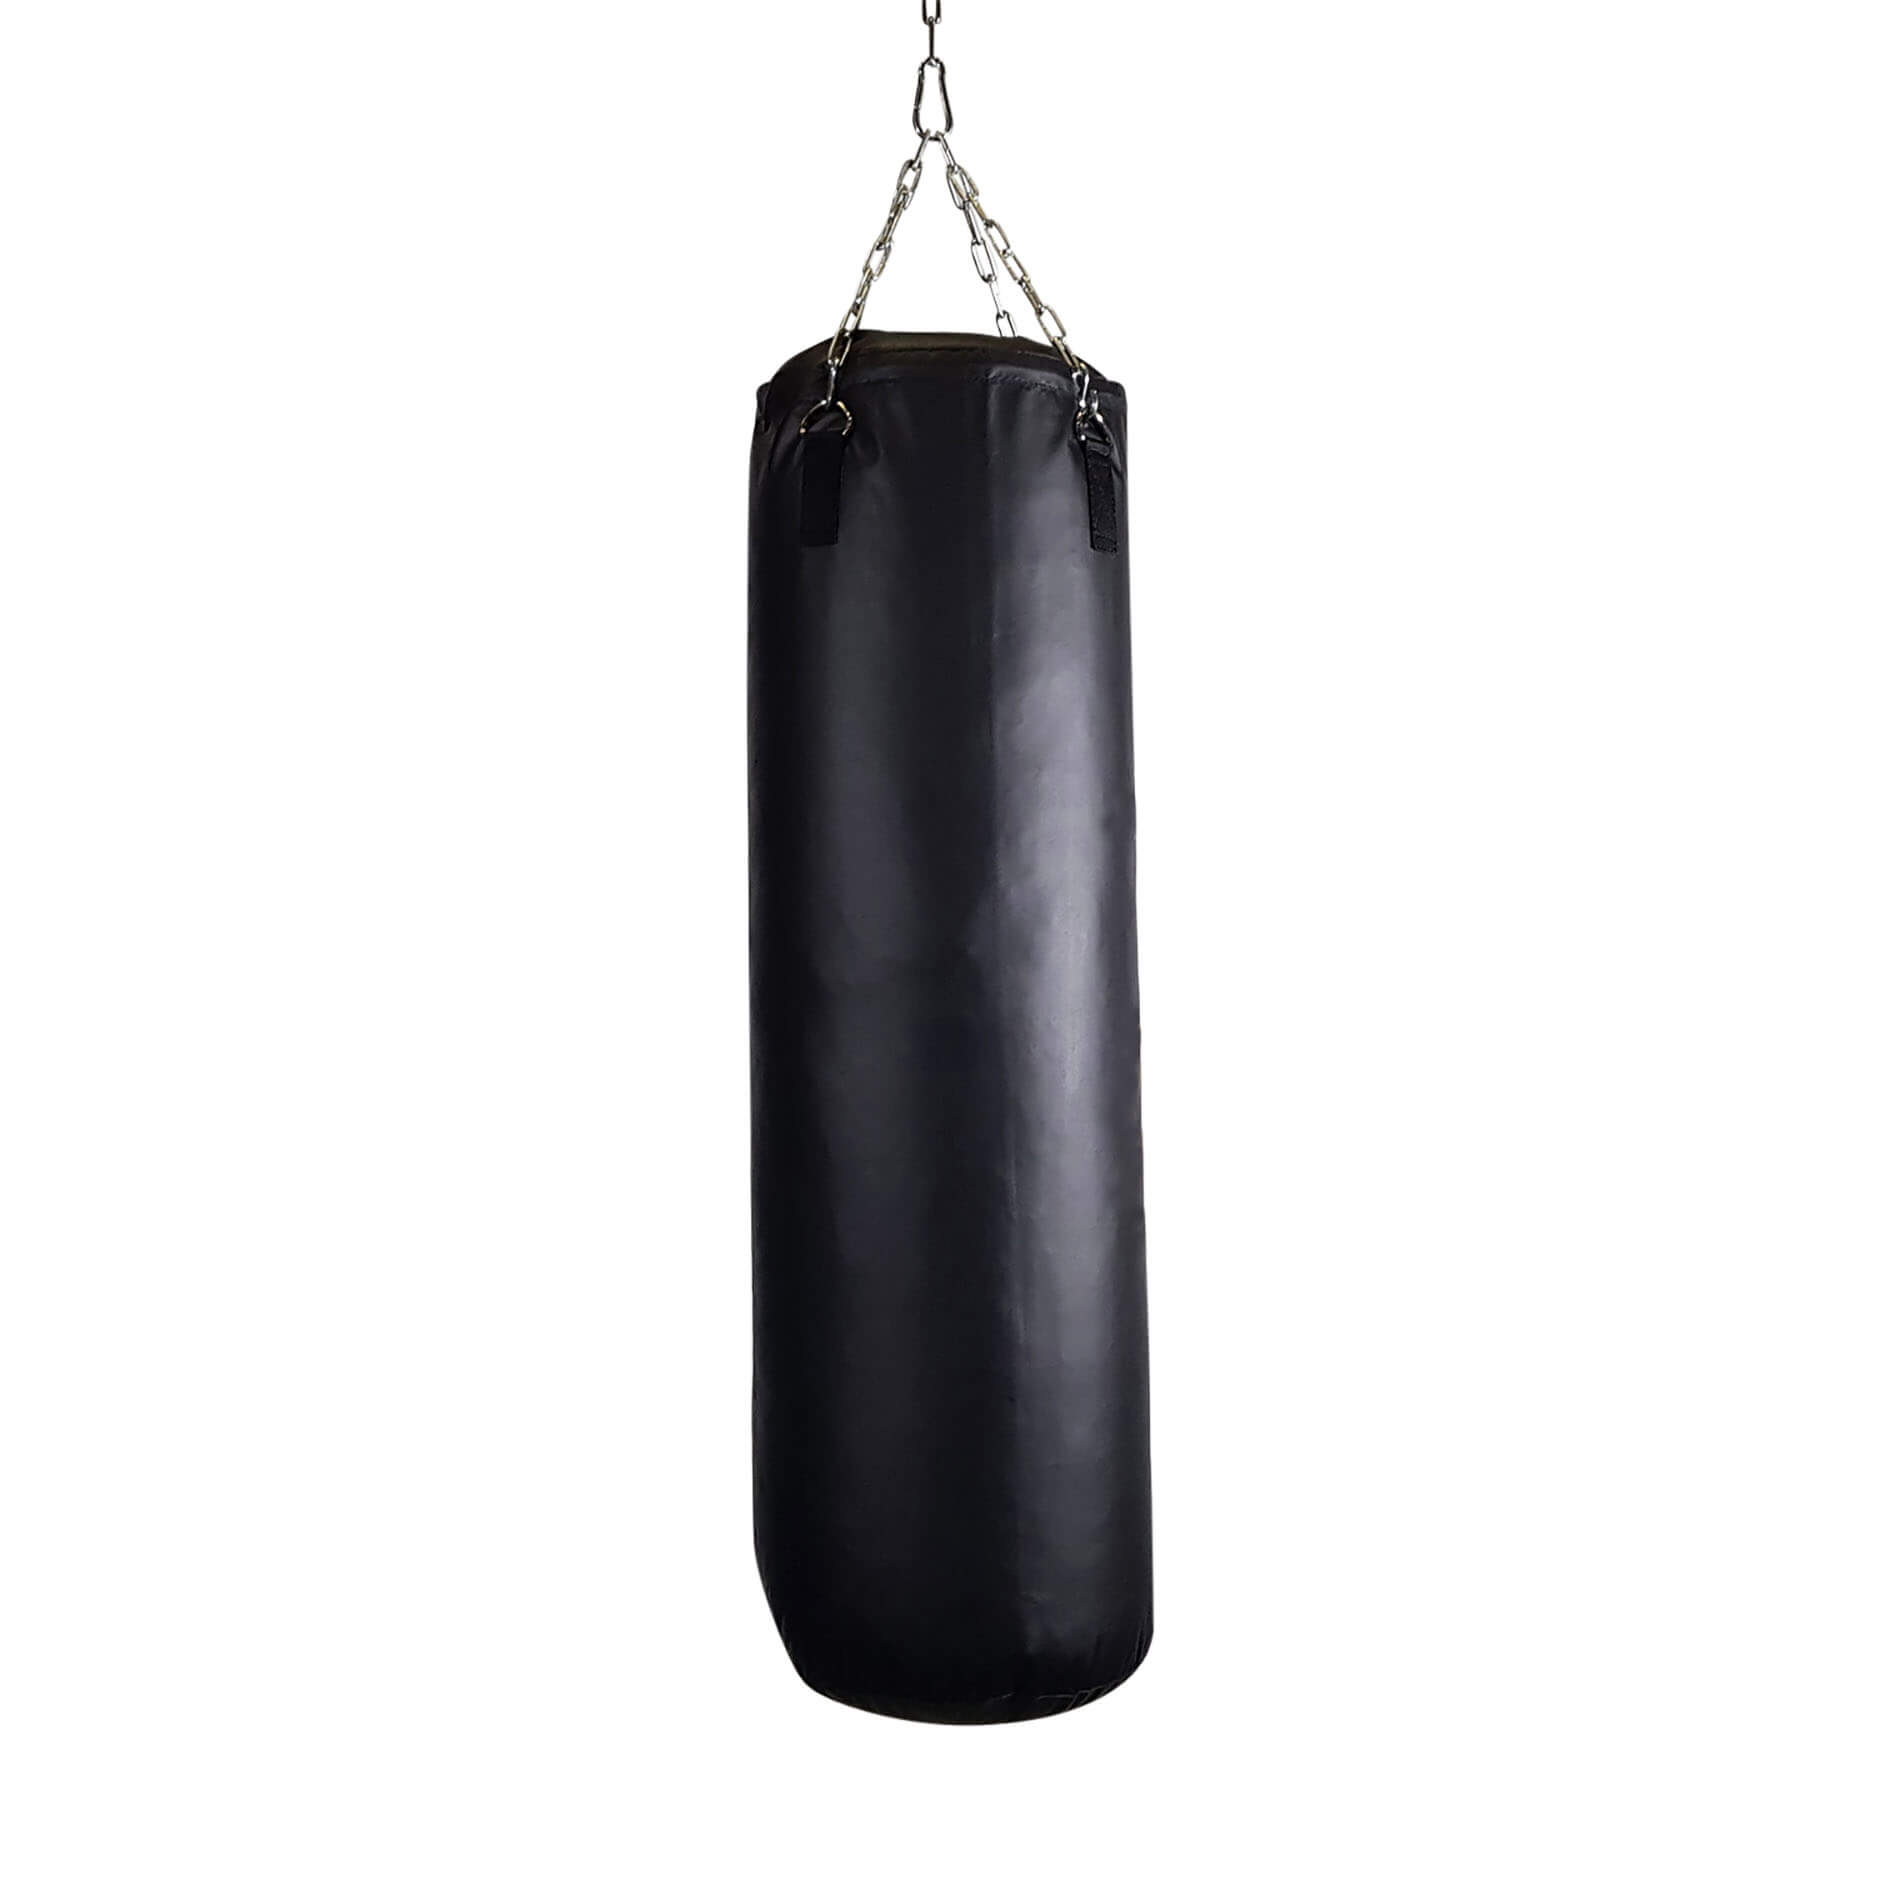 Update more than 79 pictures of punching bags super hot - in.cdgdbentre